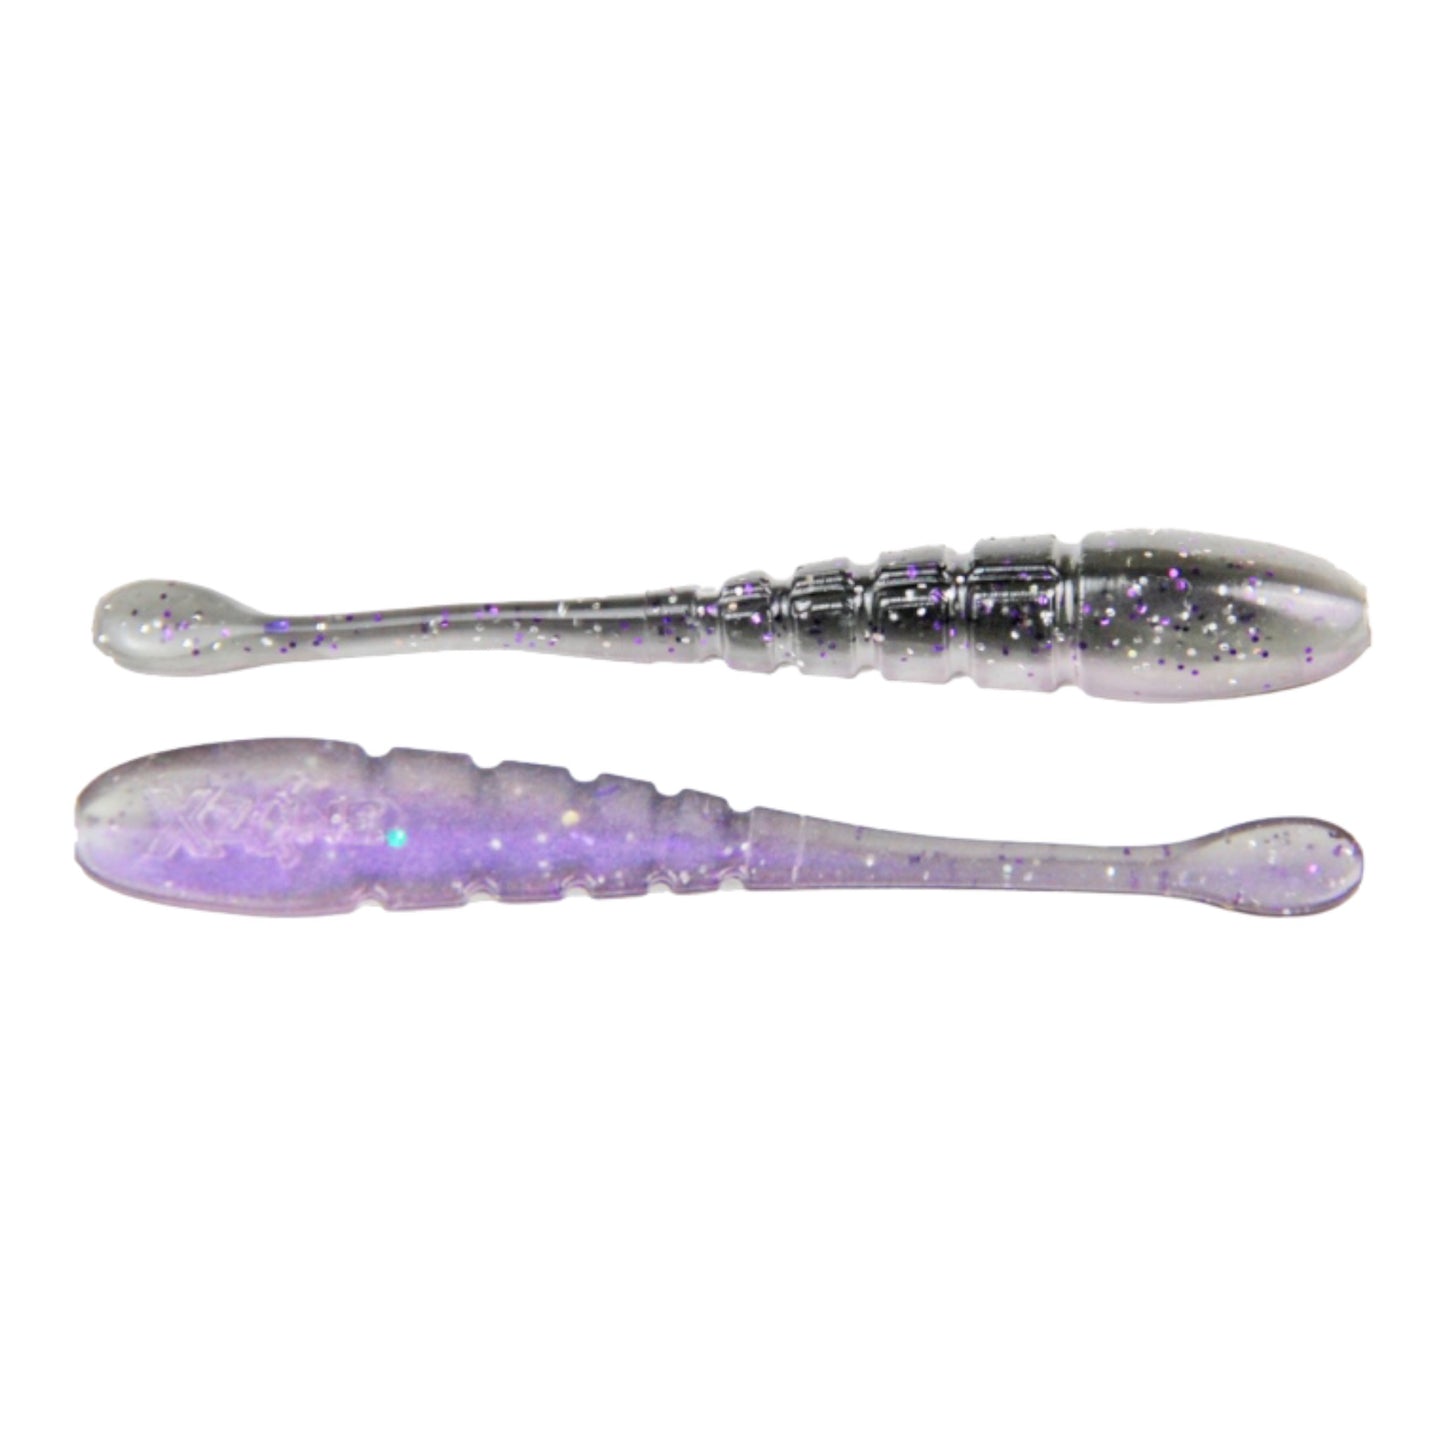 Xzone Lures Pro Series Finesse Slammer